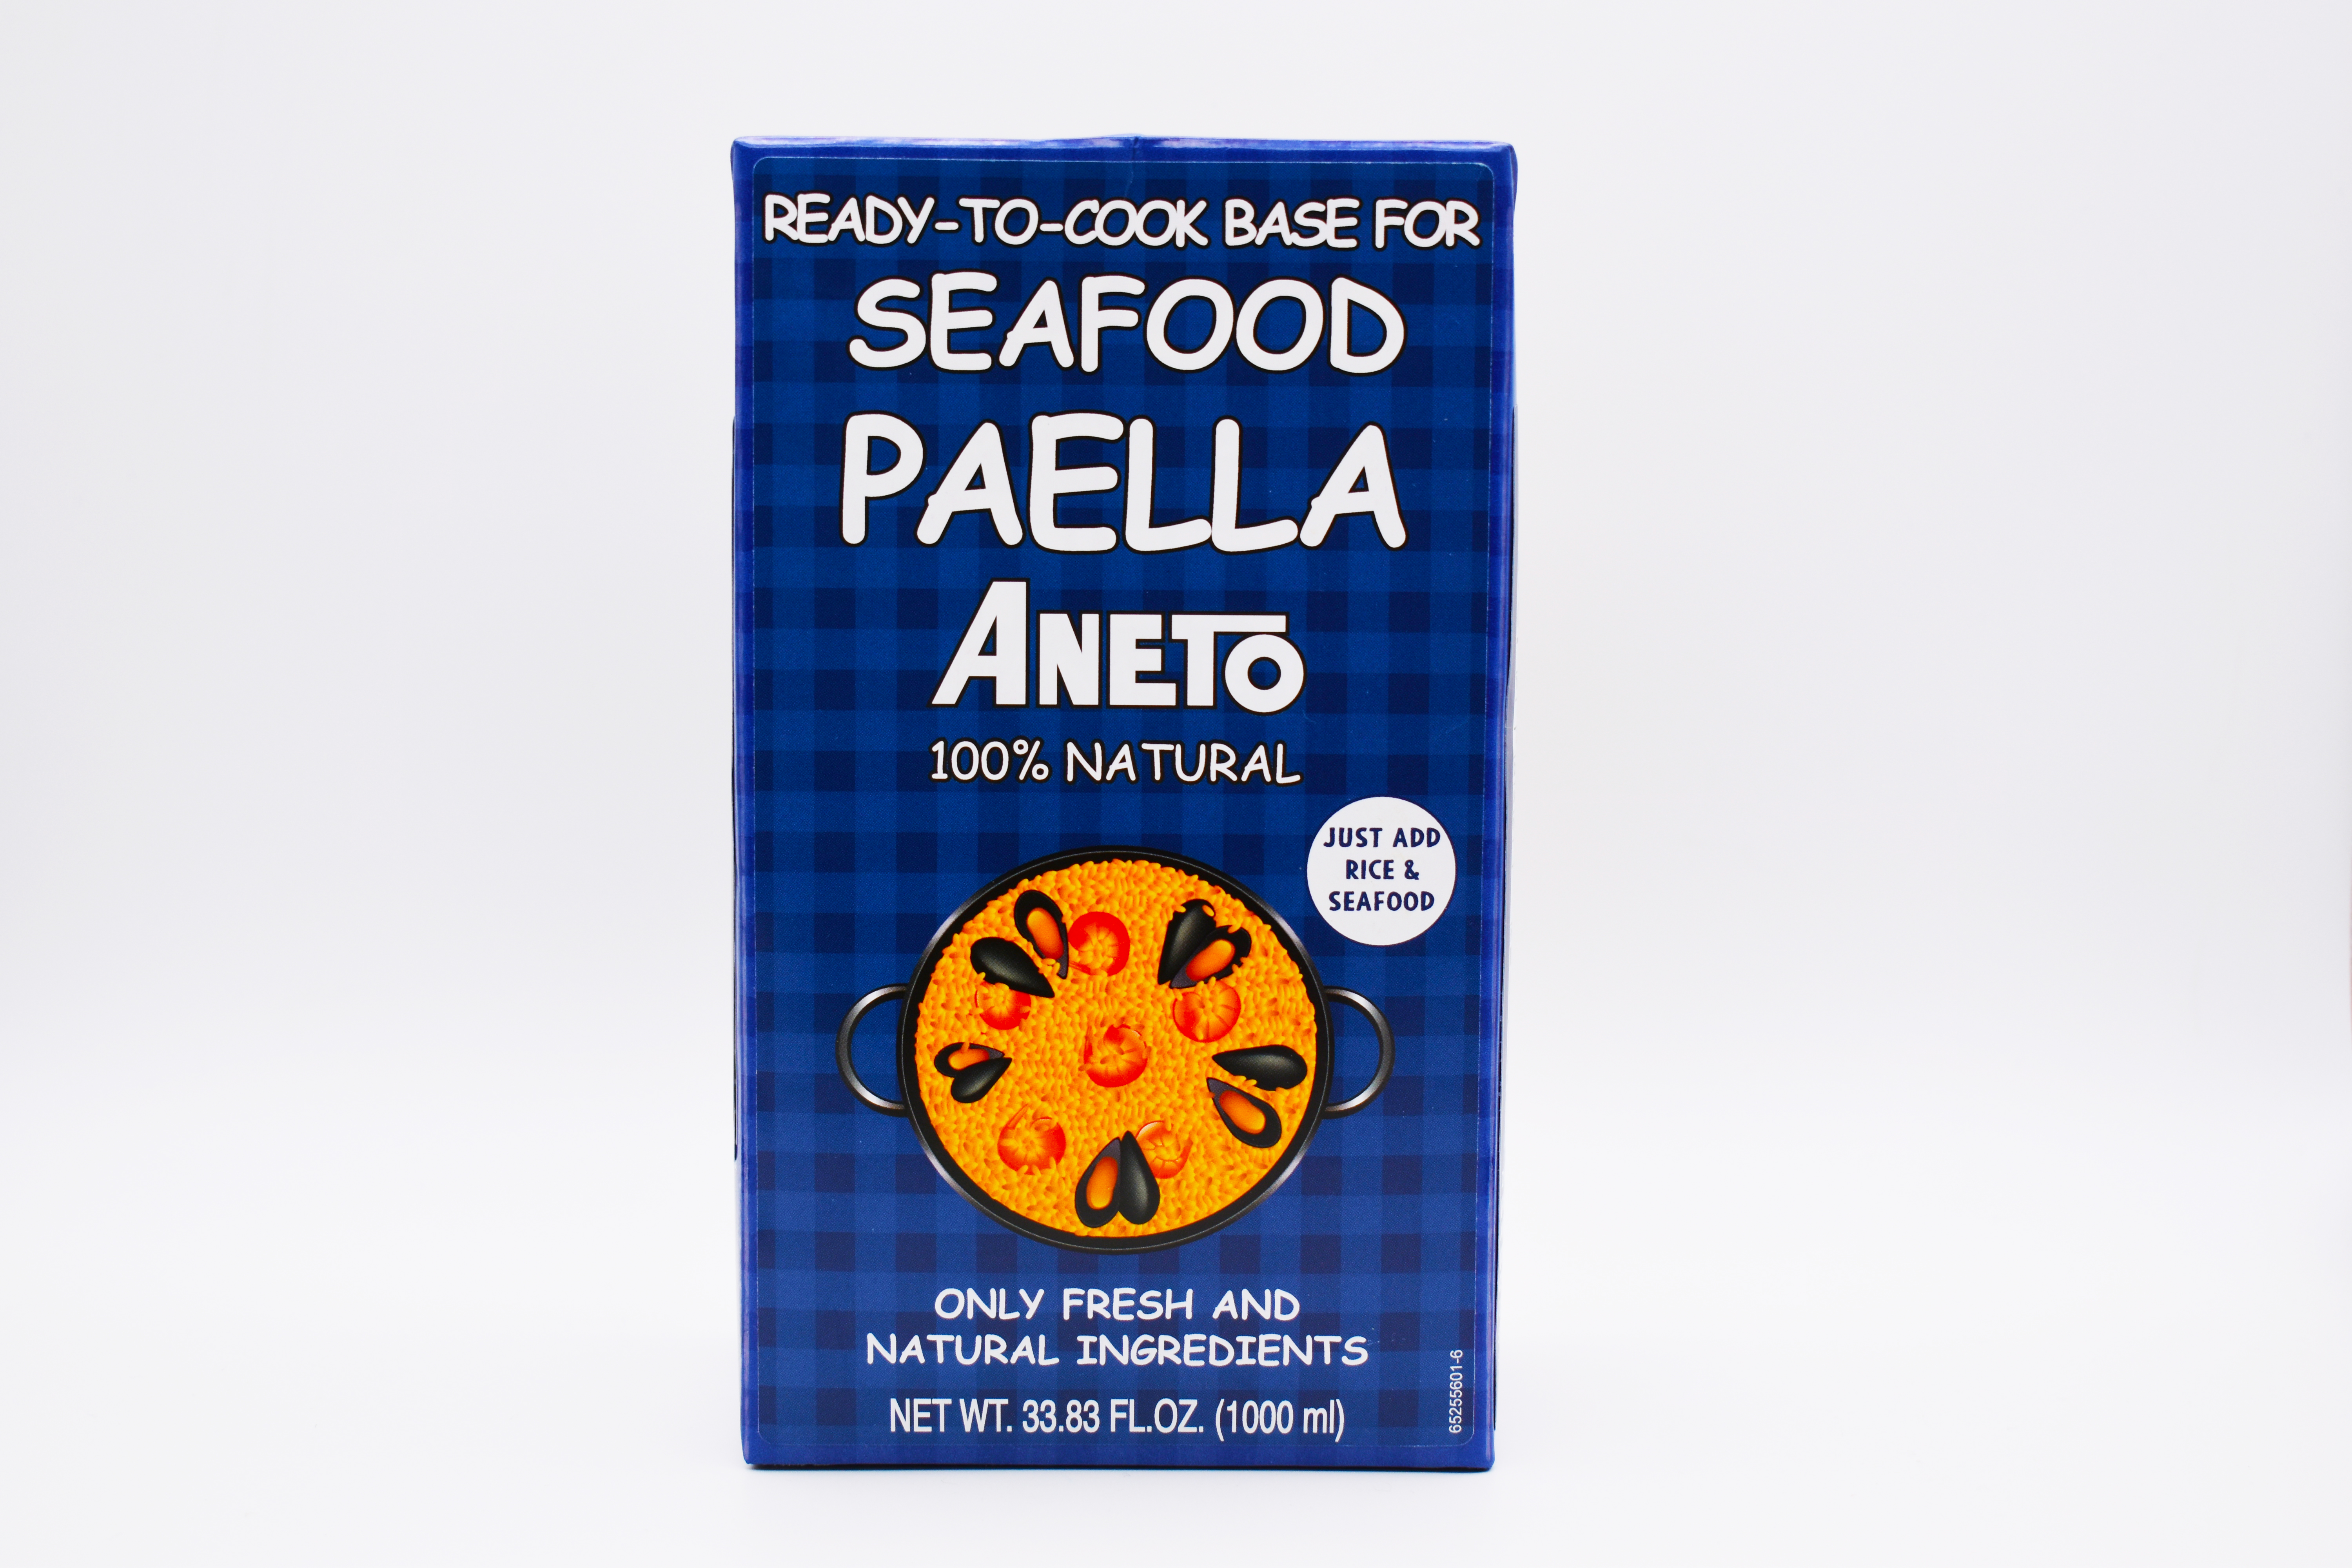 Product Image for Aneto Paella Cooking Base